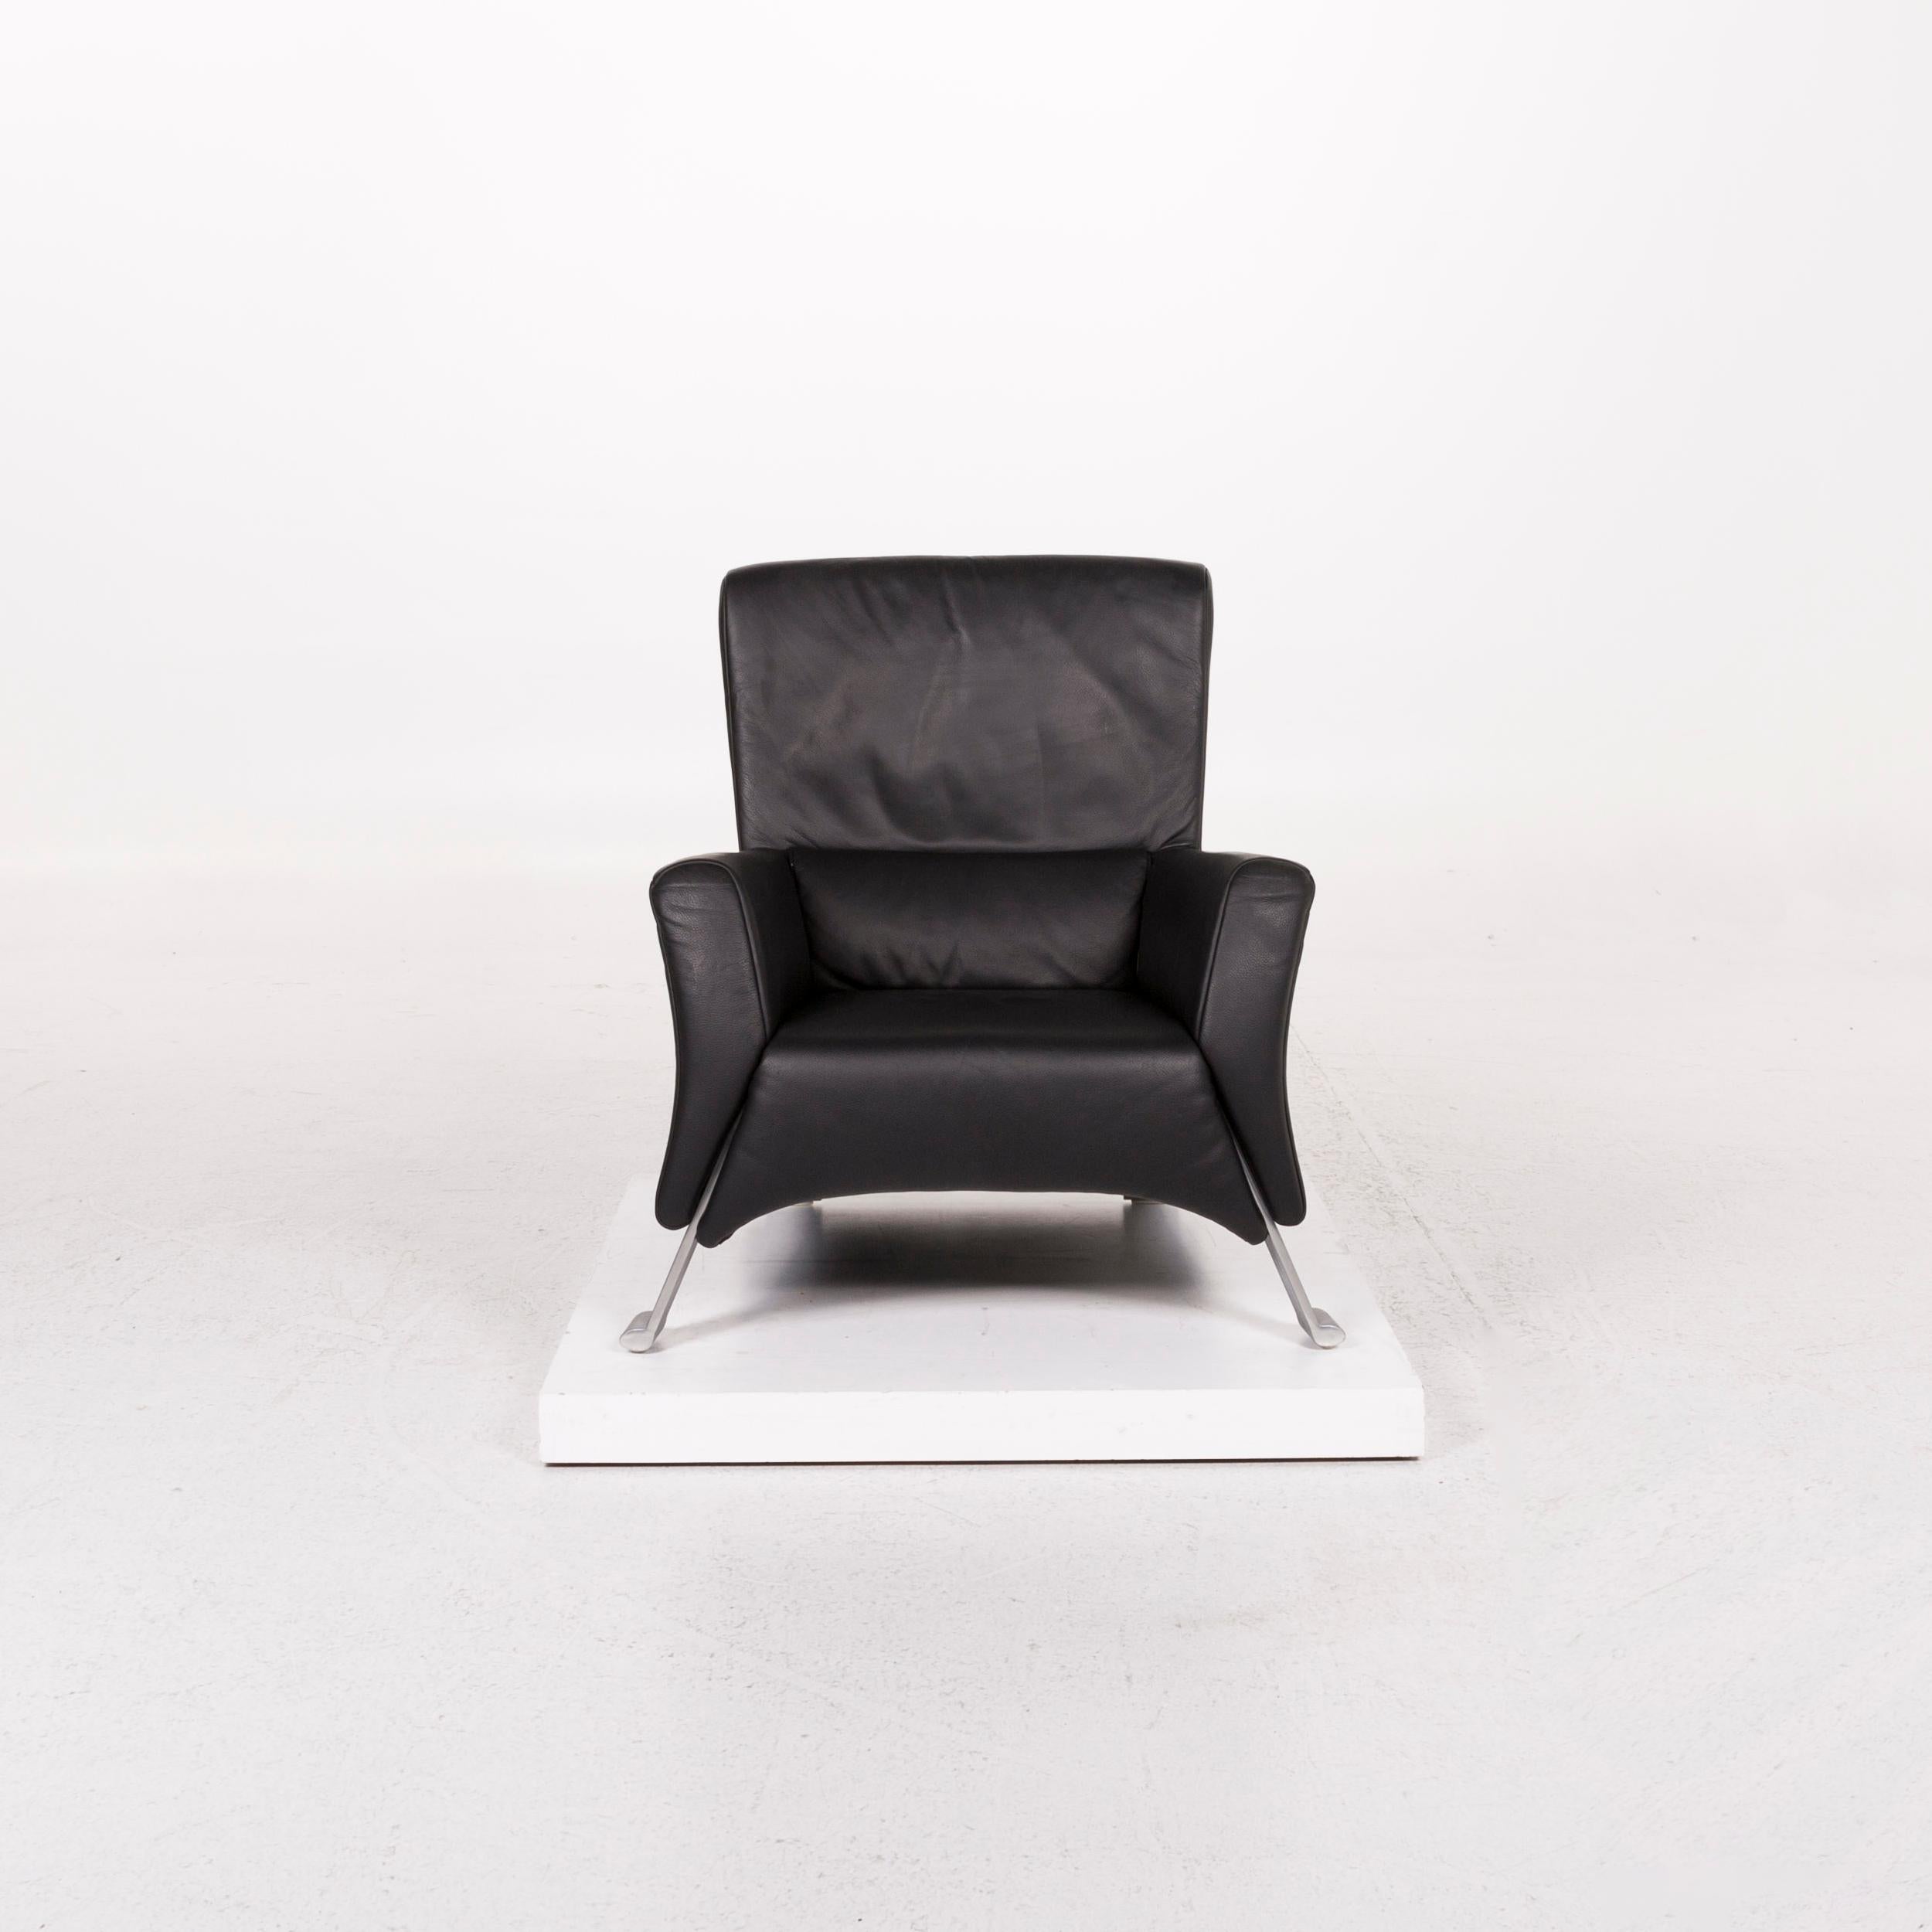 We bring to you a Rolf Benz 322 black armchair leather.
    
 

 Product measurements in centimeters:
 

Depth 90
Width 88
Height 92
Seat-height 40
Rest-height 57
Seat-depth 48
Seat-width 46
Back-height 65.